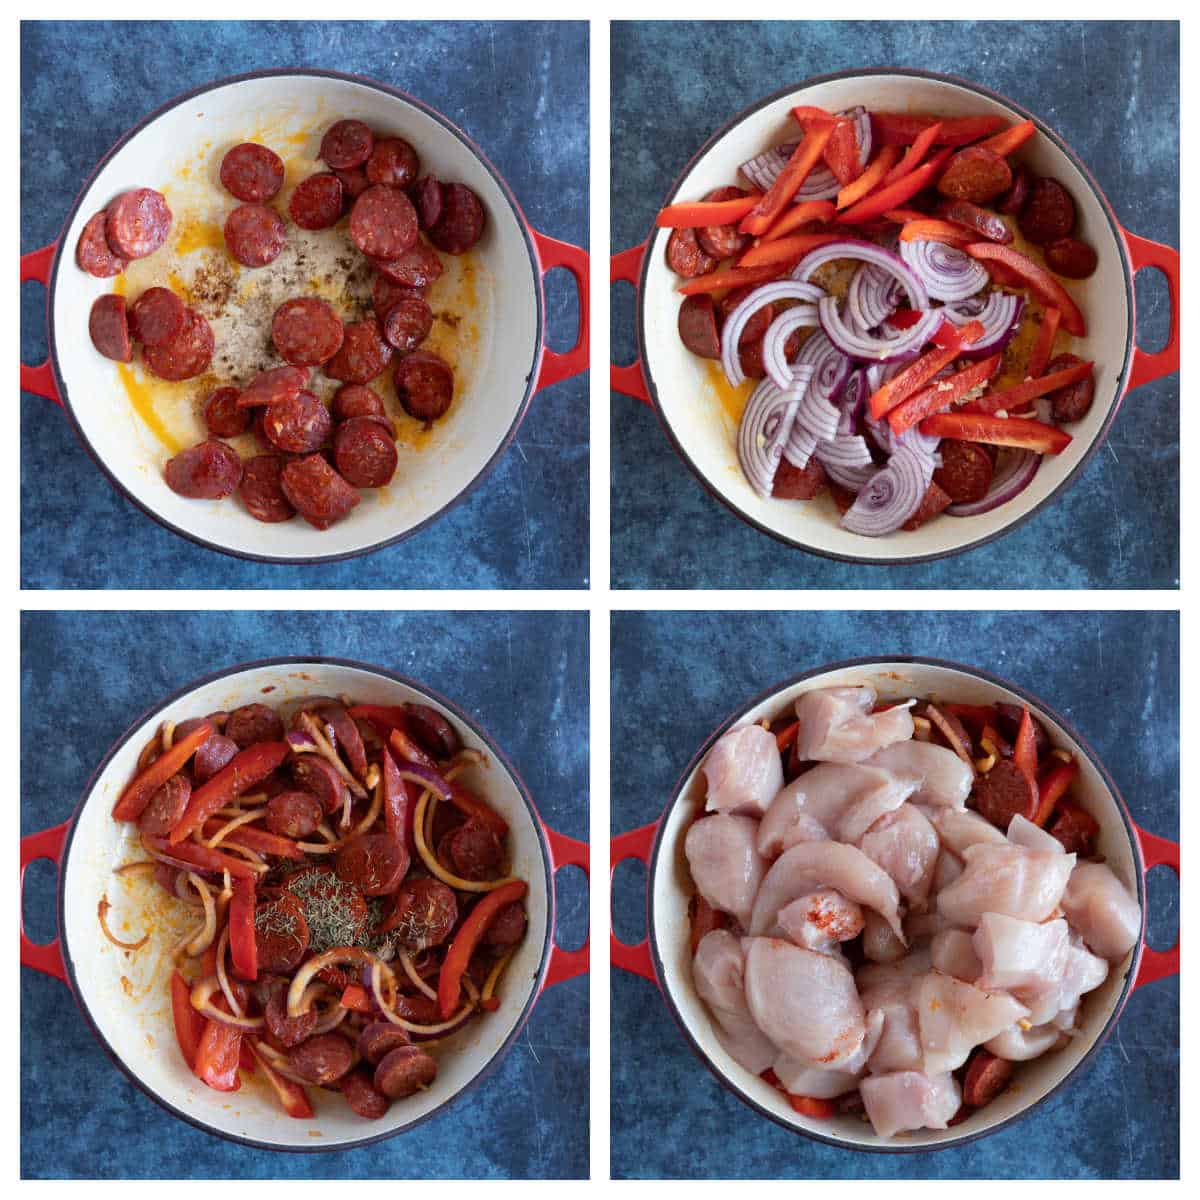 Step by step photo instructions for making chicken and chorizo stew.